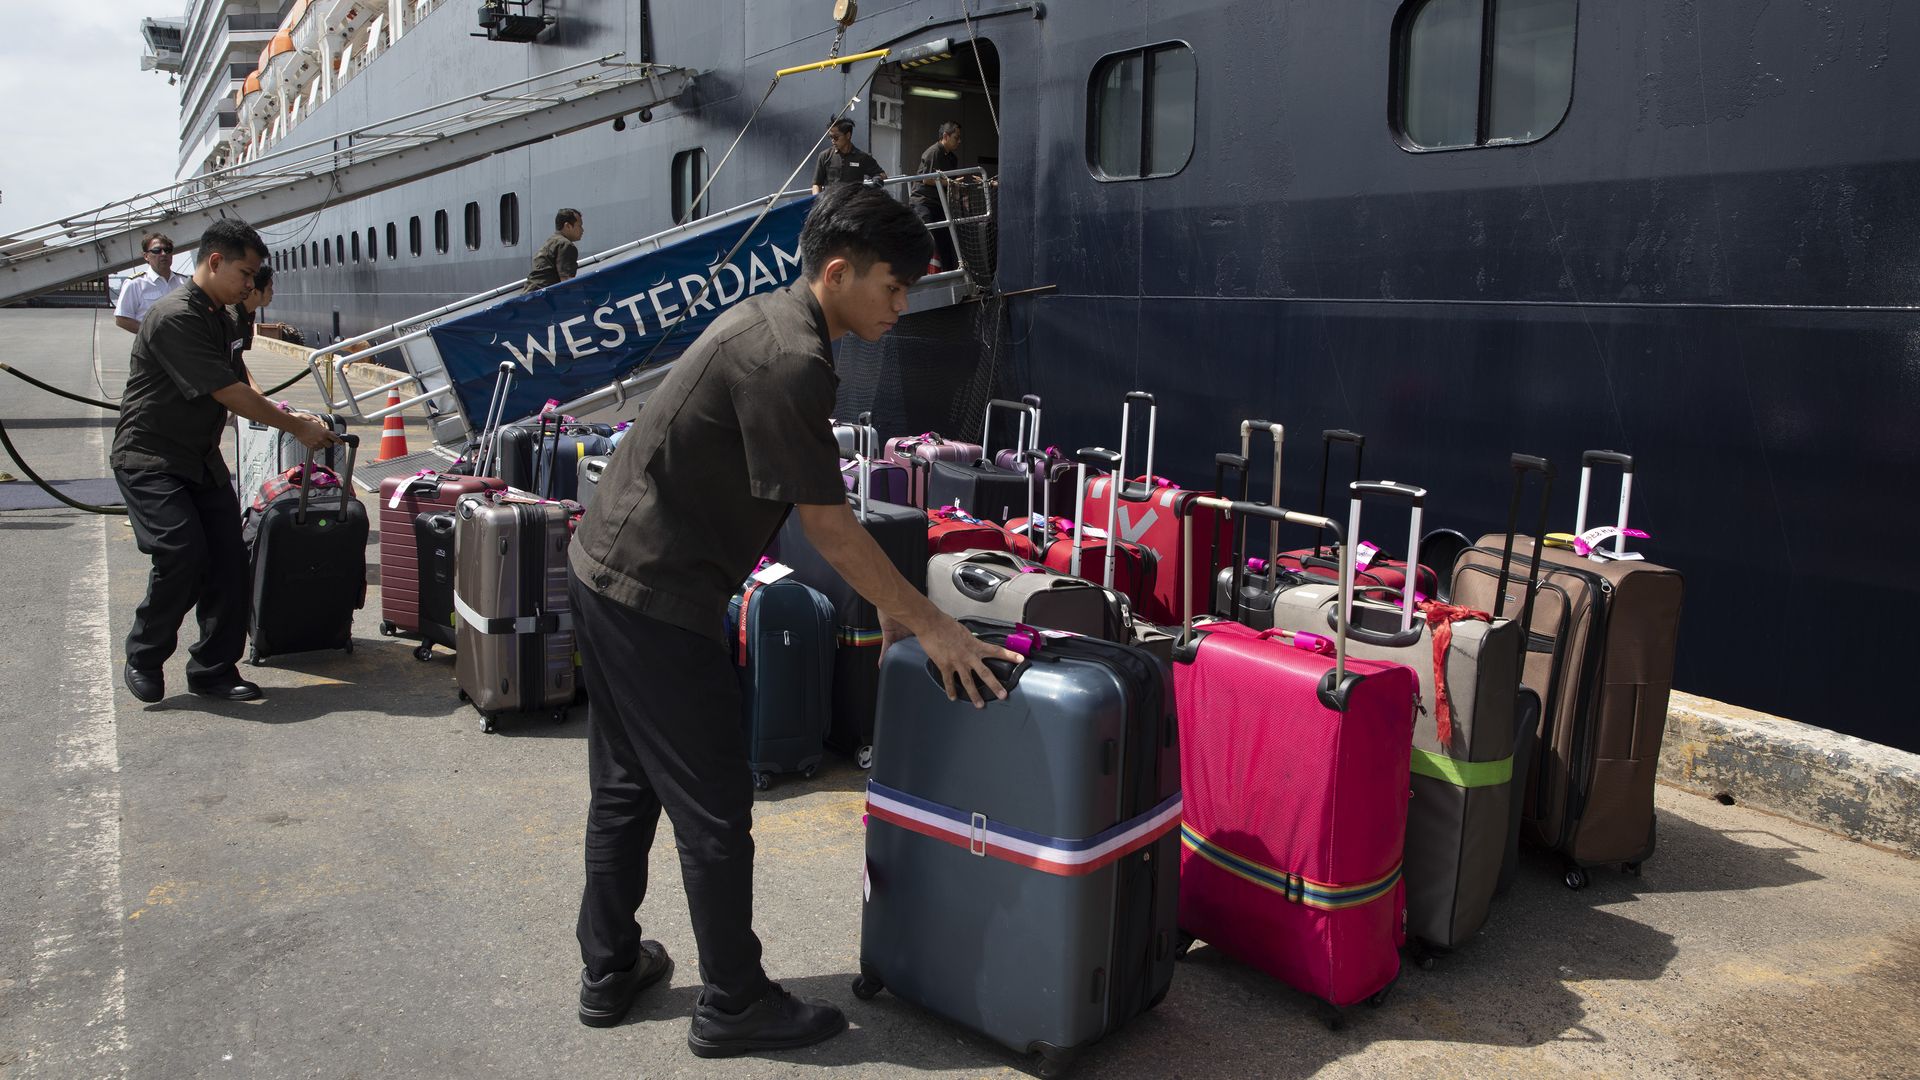  Luggage is ready as passengers get ready to disembark the MS Westerdam cruise ship docked in Sihanoukville, Cambodia on February 14